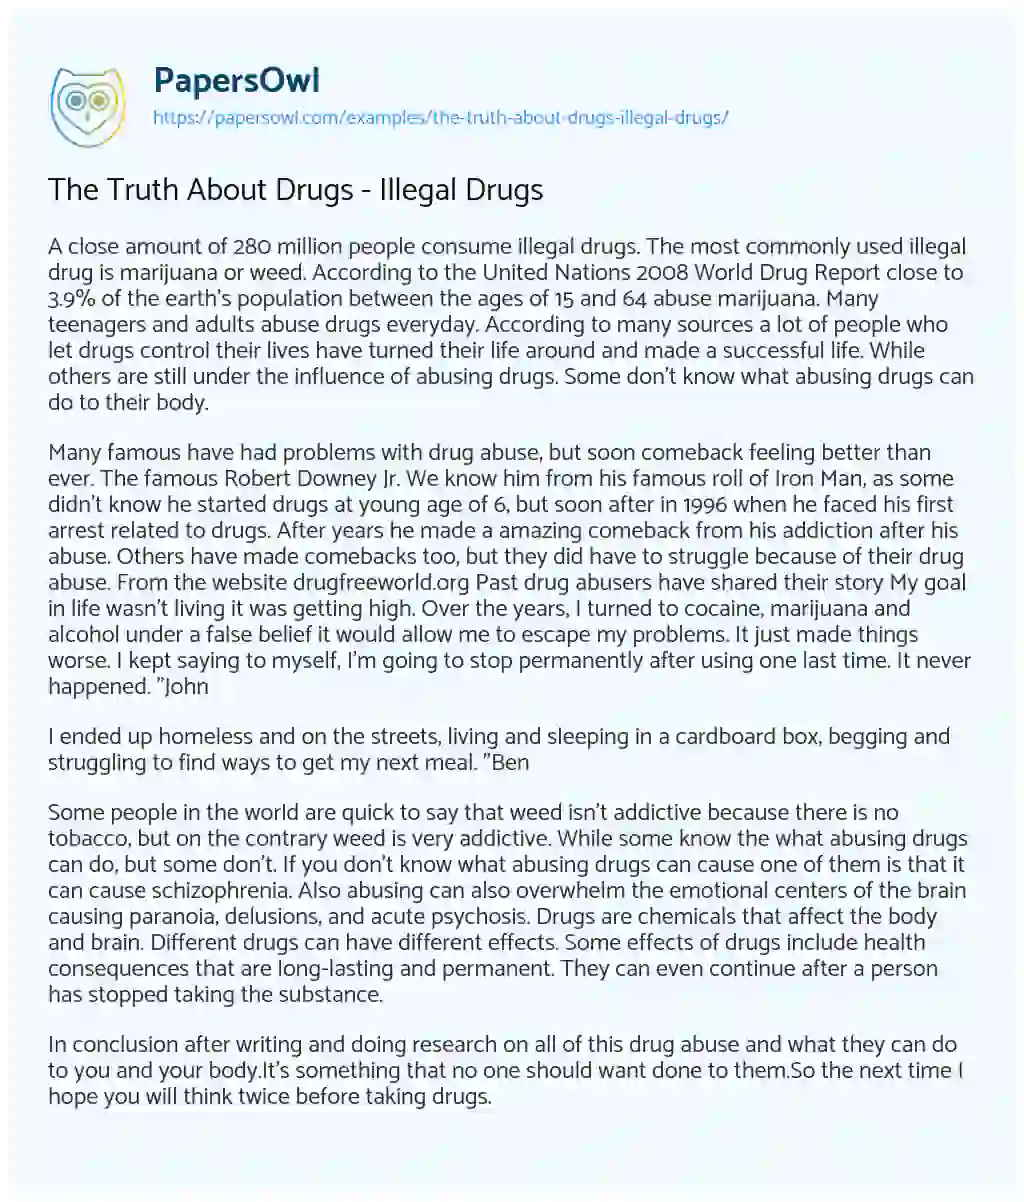 Essay on The Truth about Drugs – Illegal Drugs